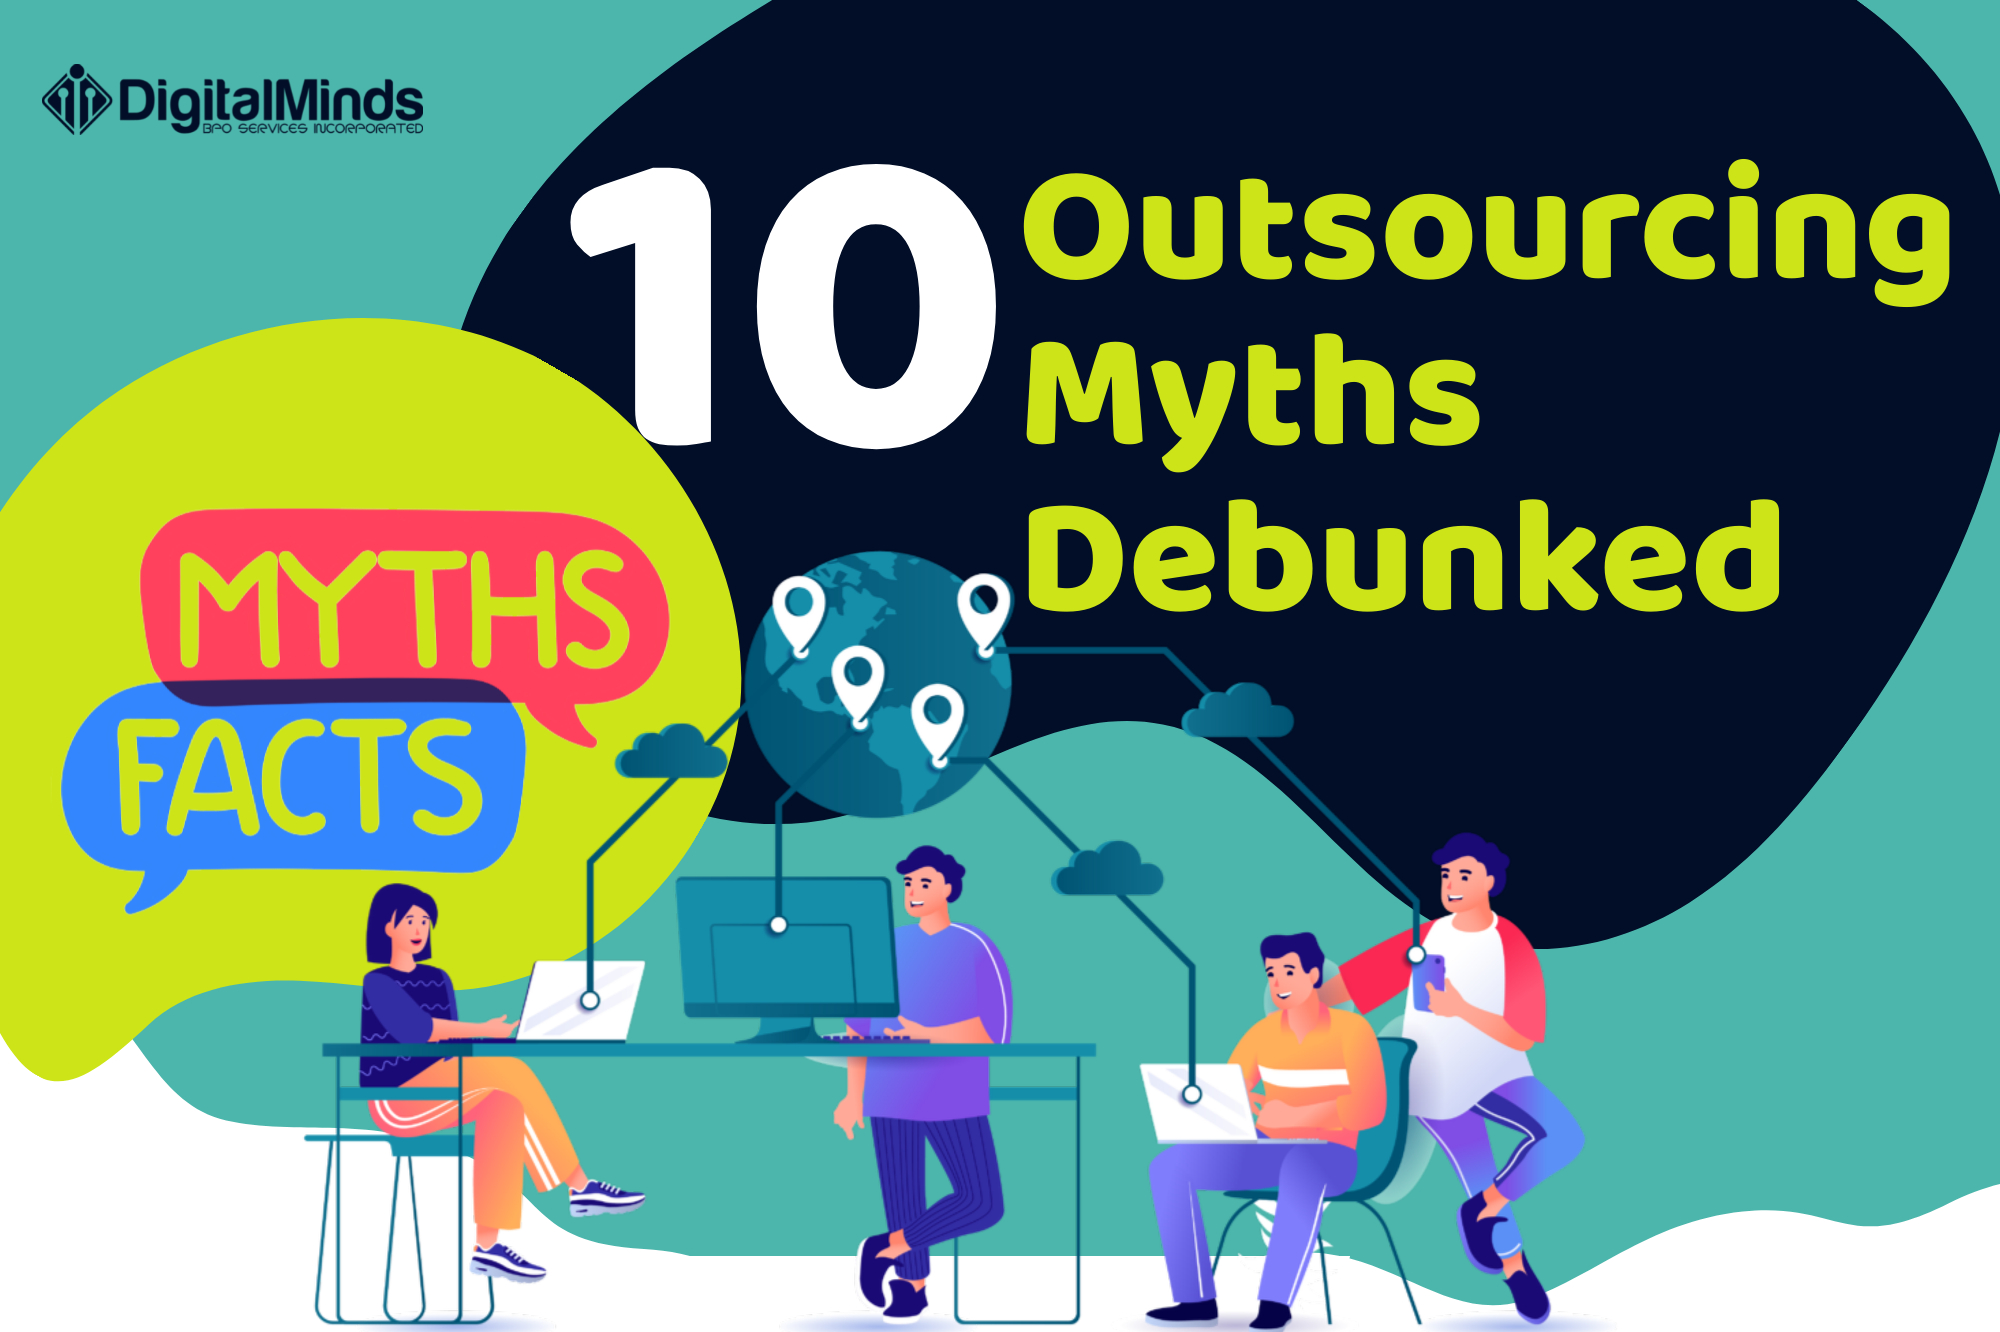 10 outsourcing myths debunked.